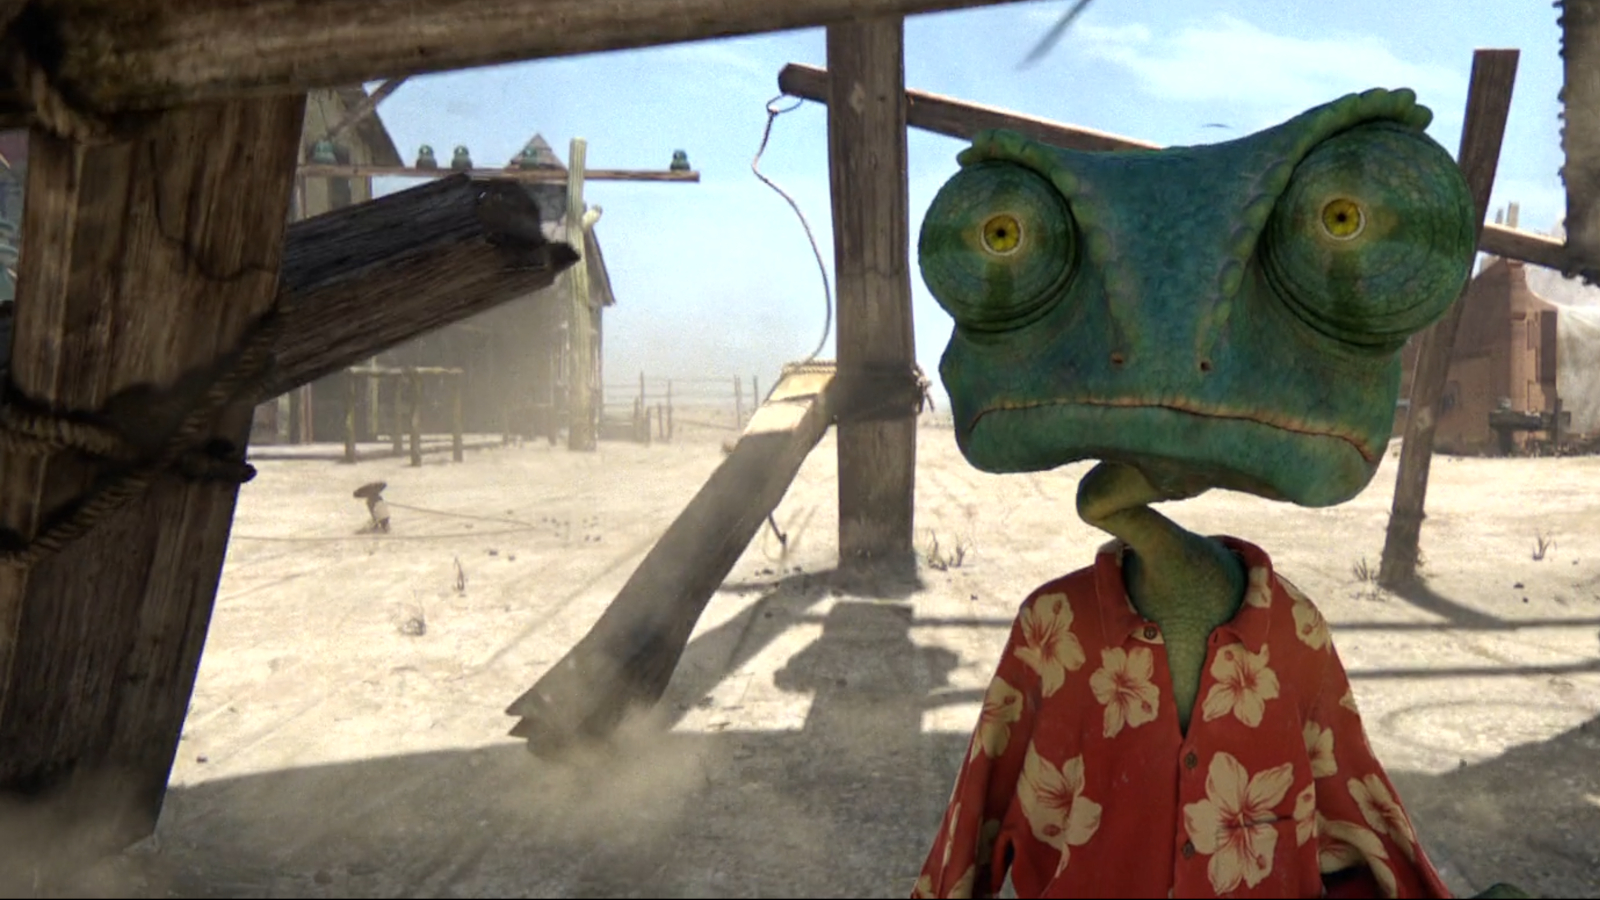 Rango 2 Release Date Is This Installment Cancelled Or Will Come Up?